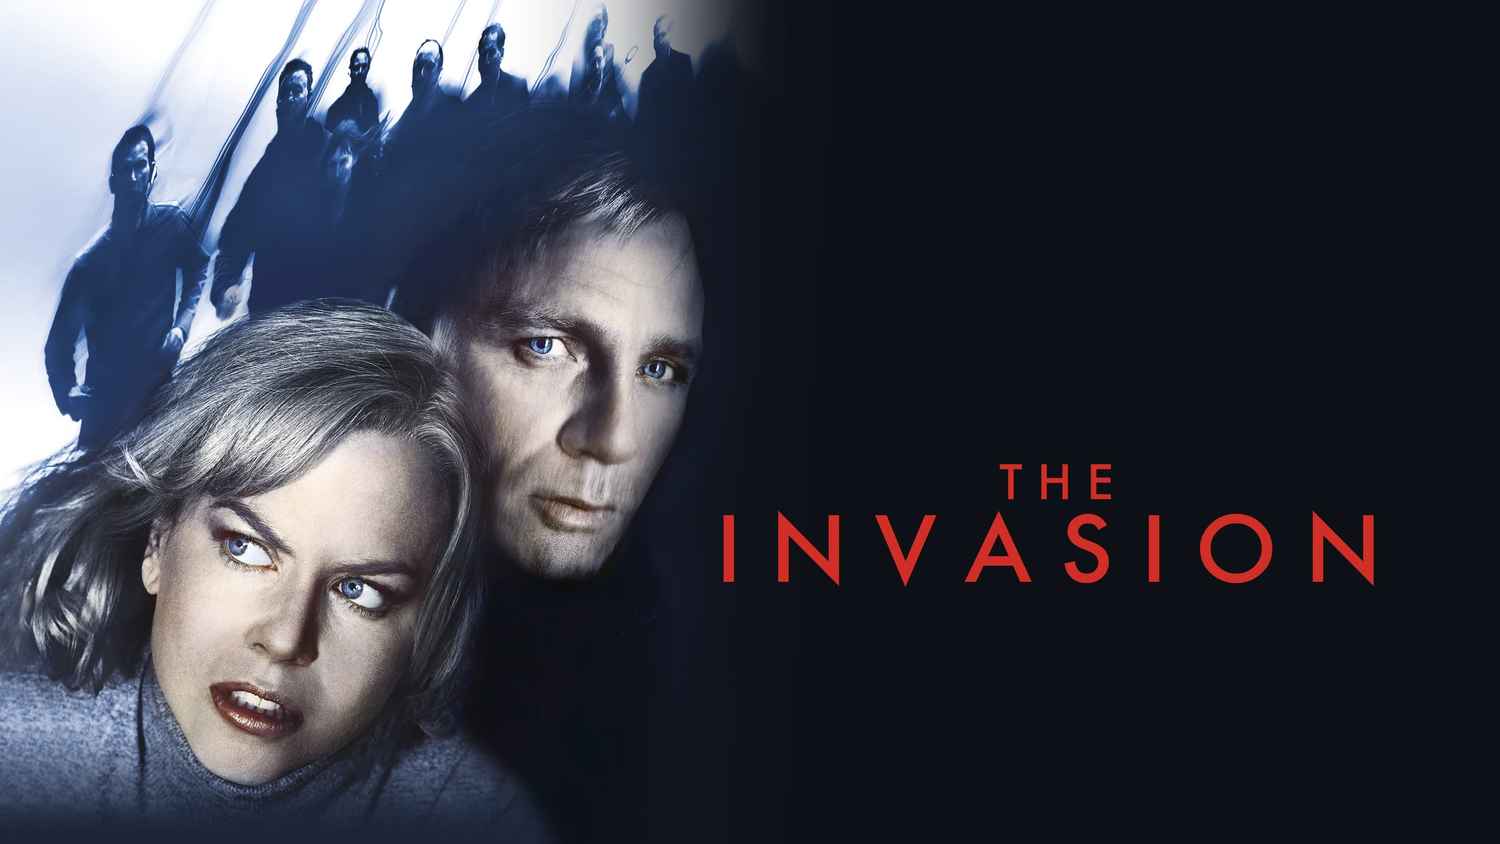 Watch The Invasion Full Movie Online, Release Date, Trailer, Cast and Songs...